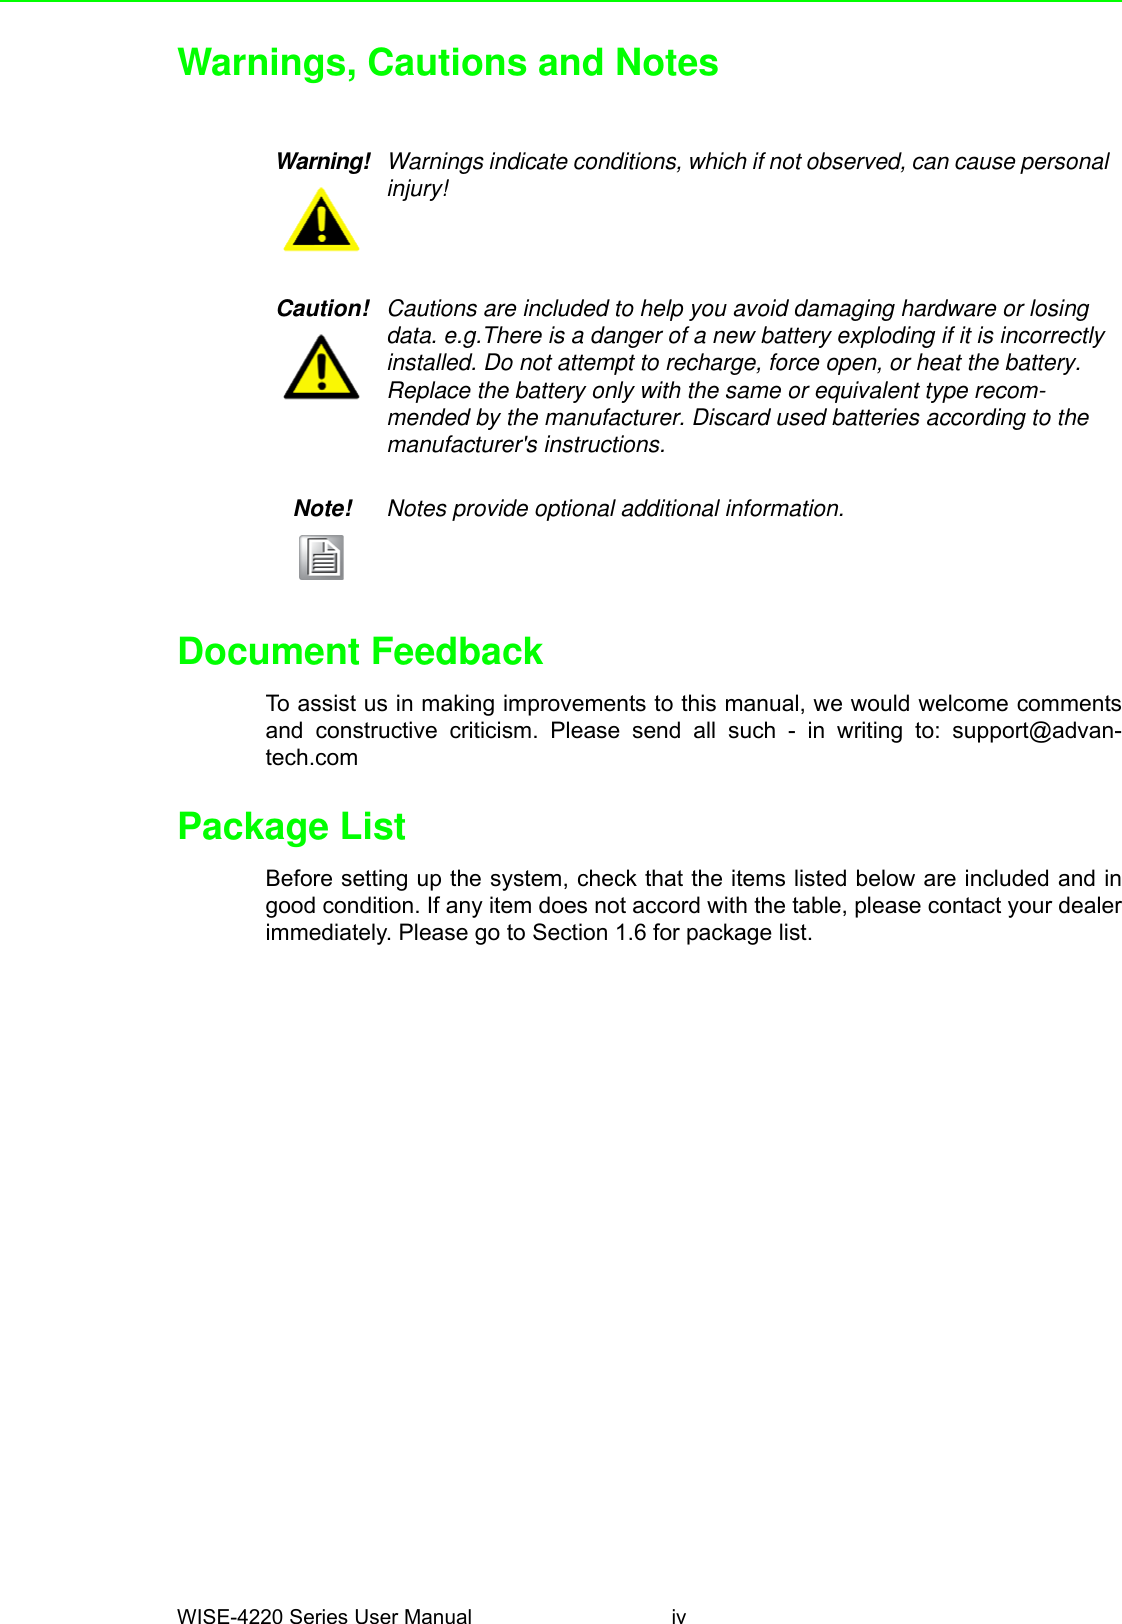 WISE-4220 Series User Manual ivWarnings, Cautions and NotesDocument FeedbackTo assist us in making improvements to this manual, we would welcome commentsand constructive criticism. Please send all such - in writing to: support@advan-tech.comPackage ListBefore setting up the system, check that the items listed below are included and ingood condition. If any item does not accord with the table, please contact your dealerimmediately. Please go to Section 1.6 for package list.Warning! Warnings indicate conditions, which if not observed, can cause personal injury!Caution! Cautions are included to help you avoid damaging hardware or losing data. e.g.There is a danger of a new battery exploding if it is incorrectly installed. Do not attempt to recharge, force open, or heat the battery. Replace the battery only with the same or equivalent type recom-mended by the manufacturer. Discard used batteries according to the manufacturer&apos;s instructions.Note! Notes provide optional additional information.